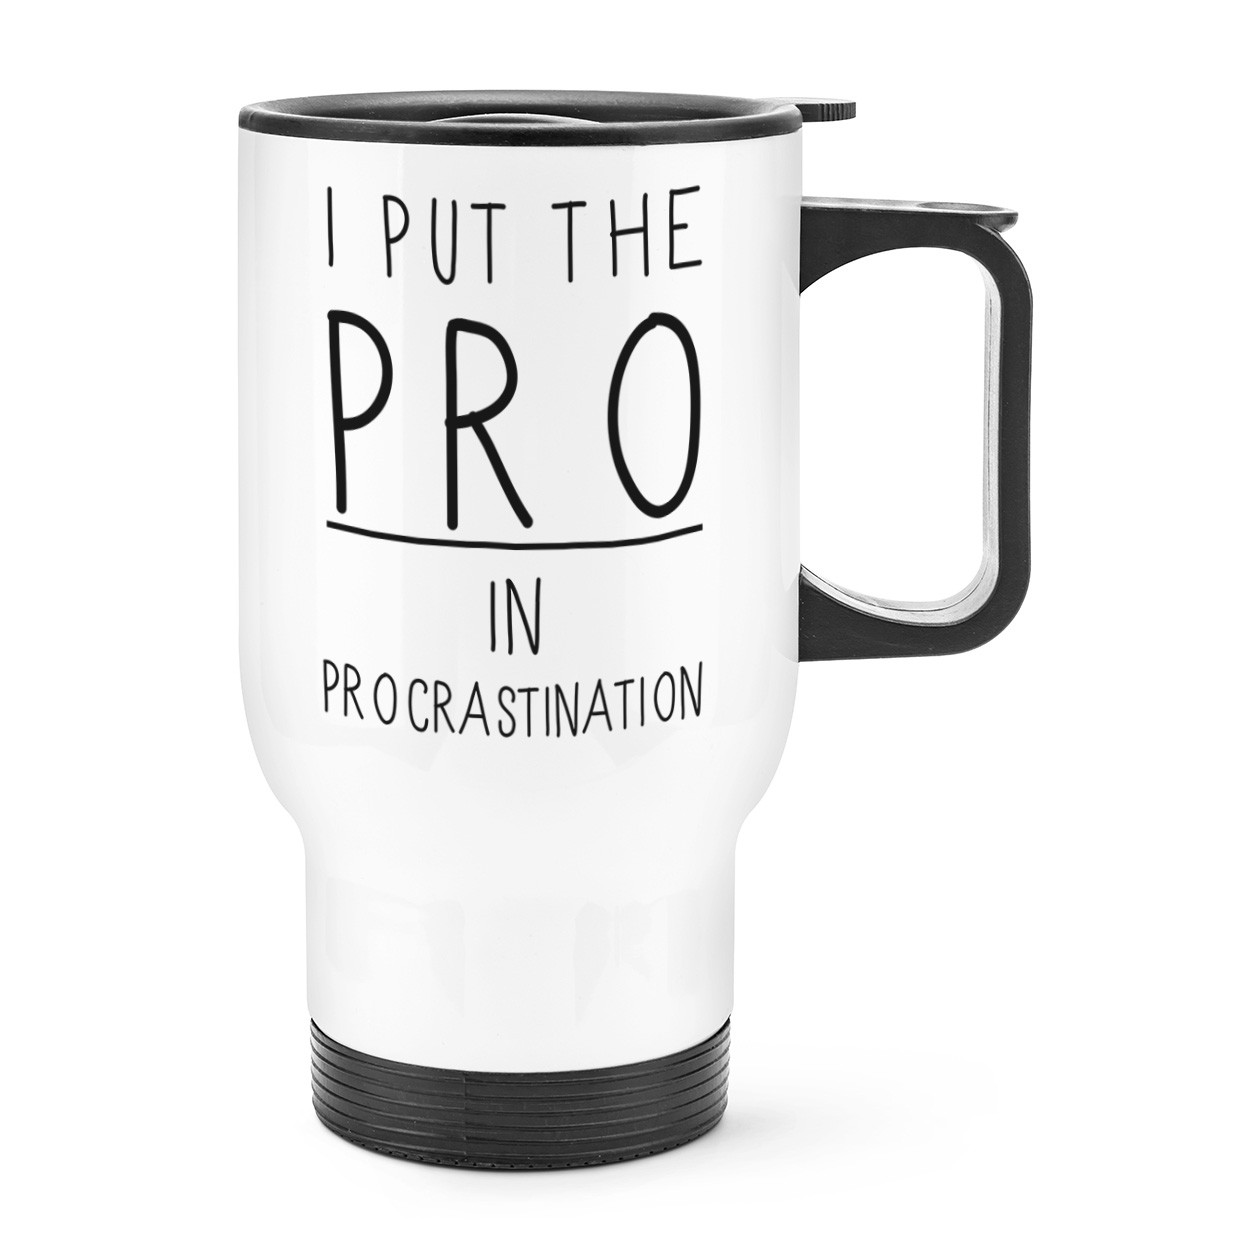 I Put The Pro In Procrastination Travel Mug Cup With Handle